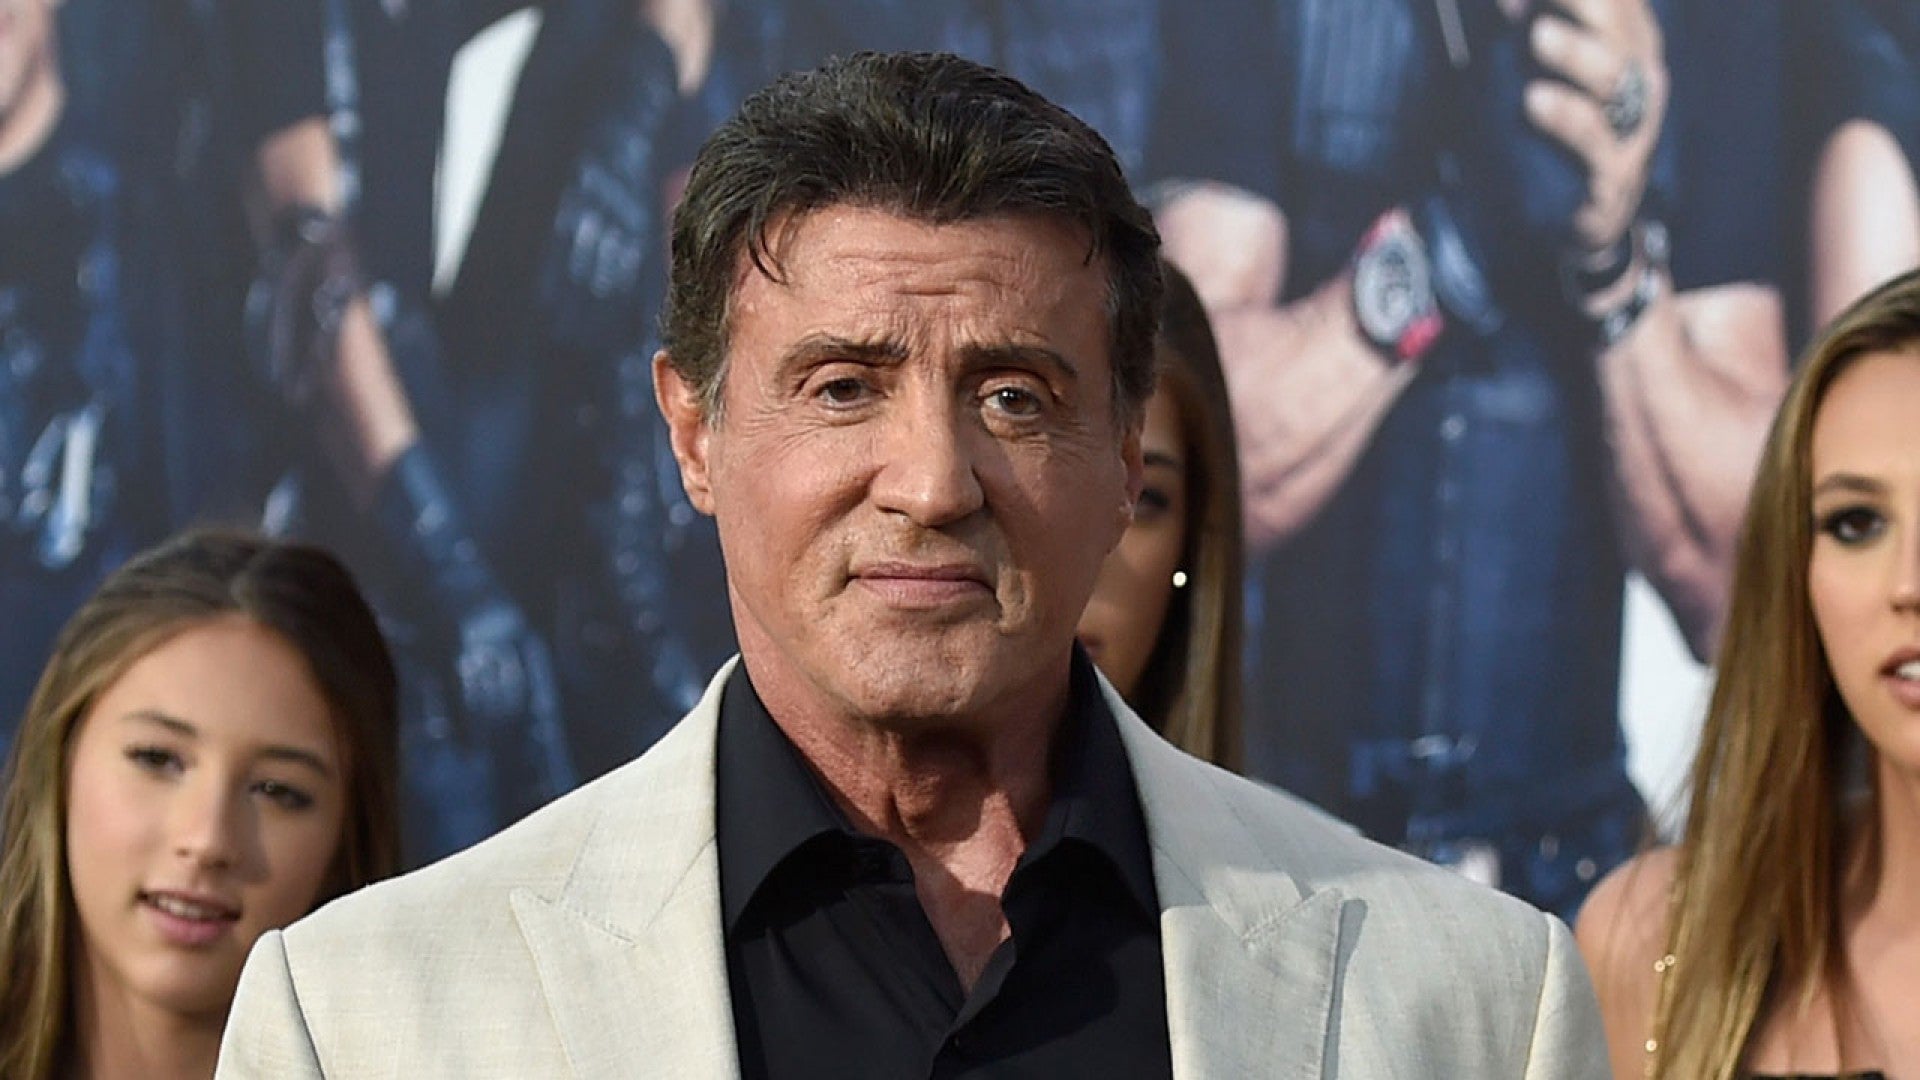 Sylvester Stallone Shares Photo From Just Before Attack in Nice, France